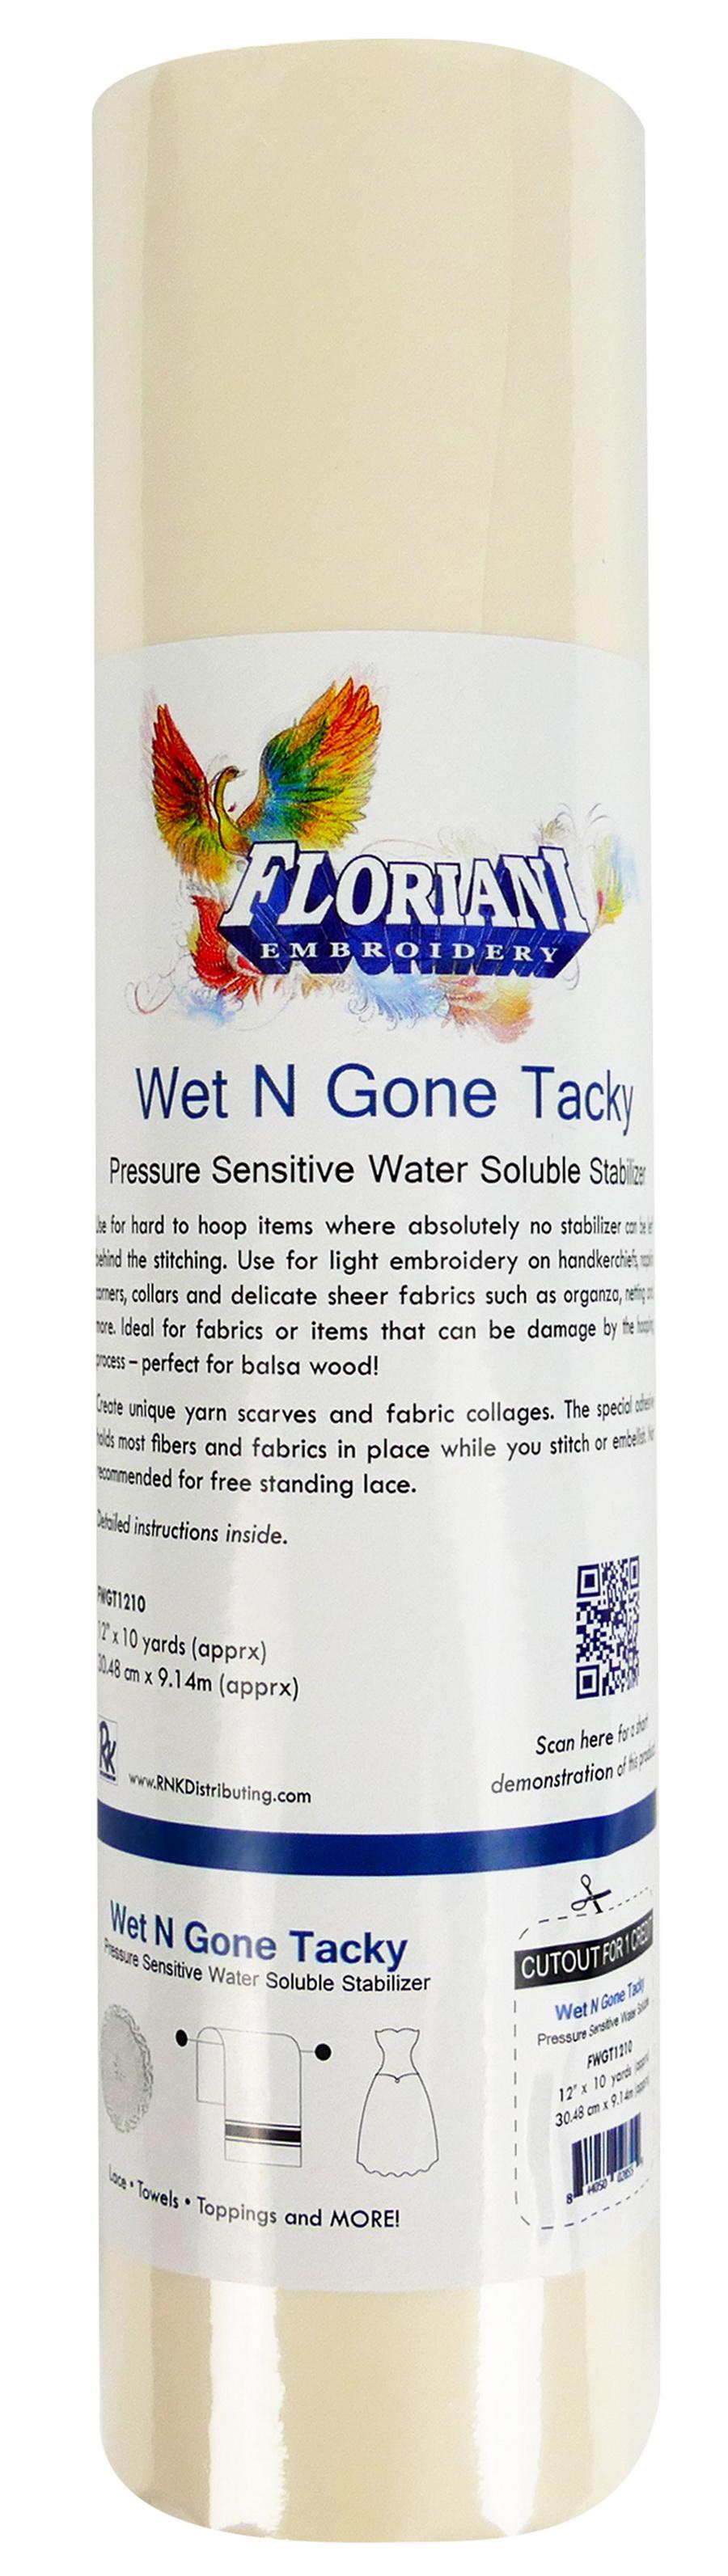 Floriani Wet N Gone Tacky Water Soluble Stabilizer, 12 in. x 10 yds.